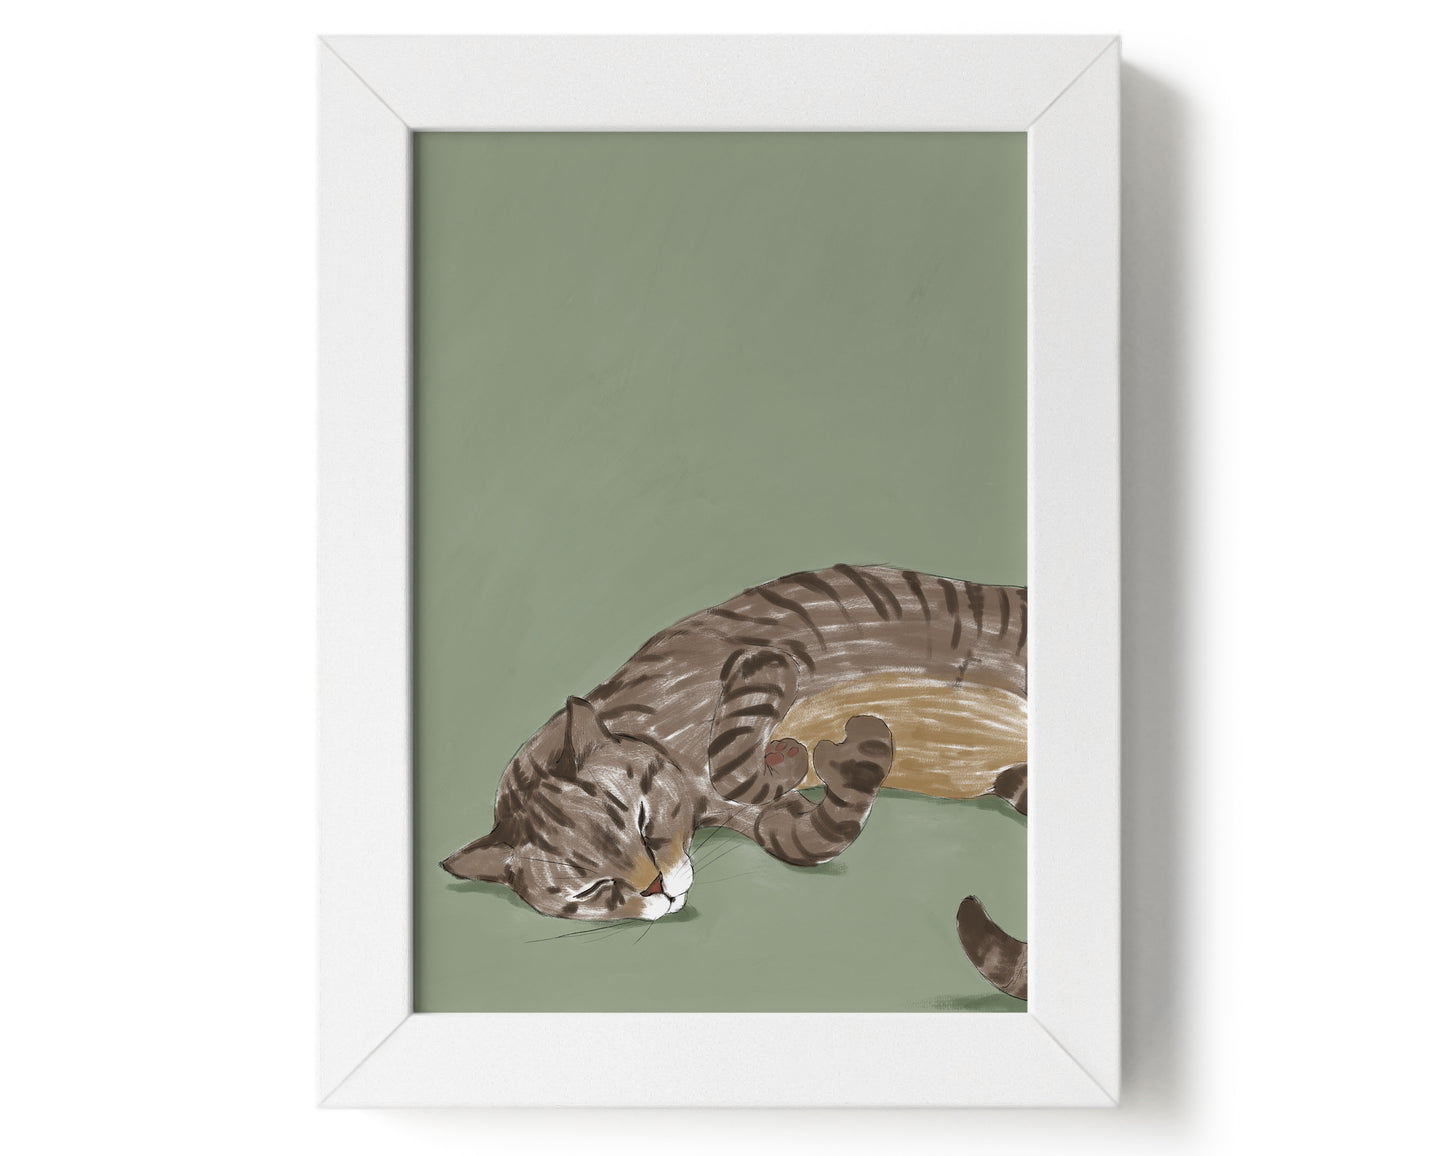 "Isengrin" by Catherine Hébert - Striped Brown Tabby Cat Giclee Art Print - 5"x7" size